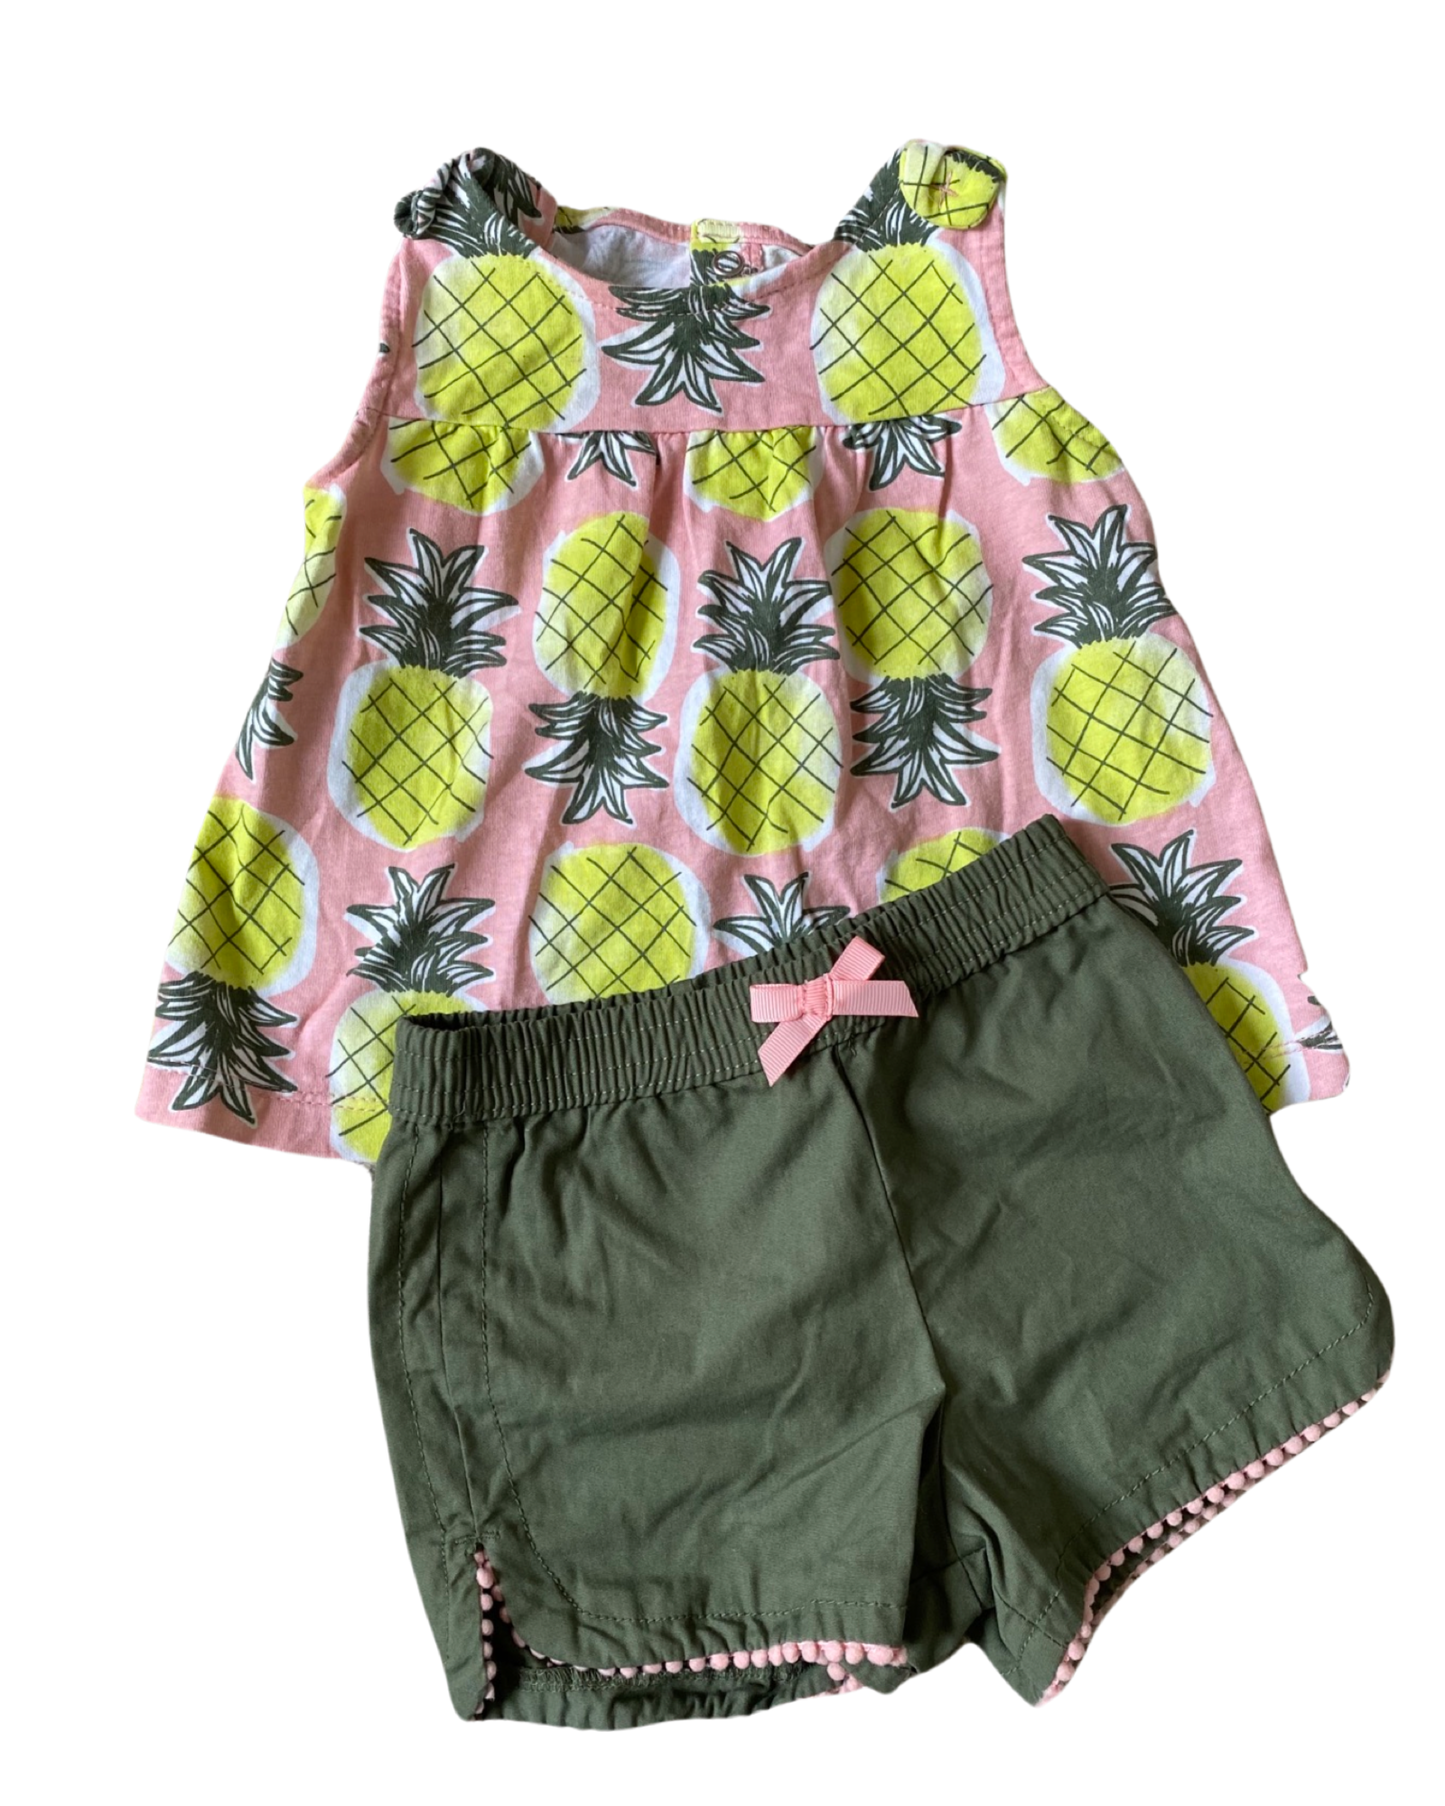 Carters just for you 2 piece pineapple top & khaki shorts set (size 9-12mths)